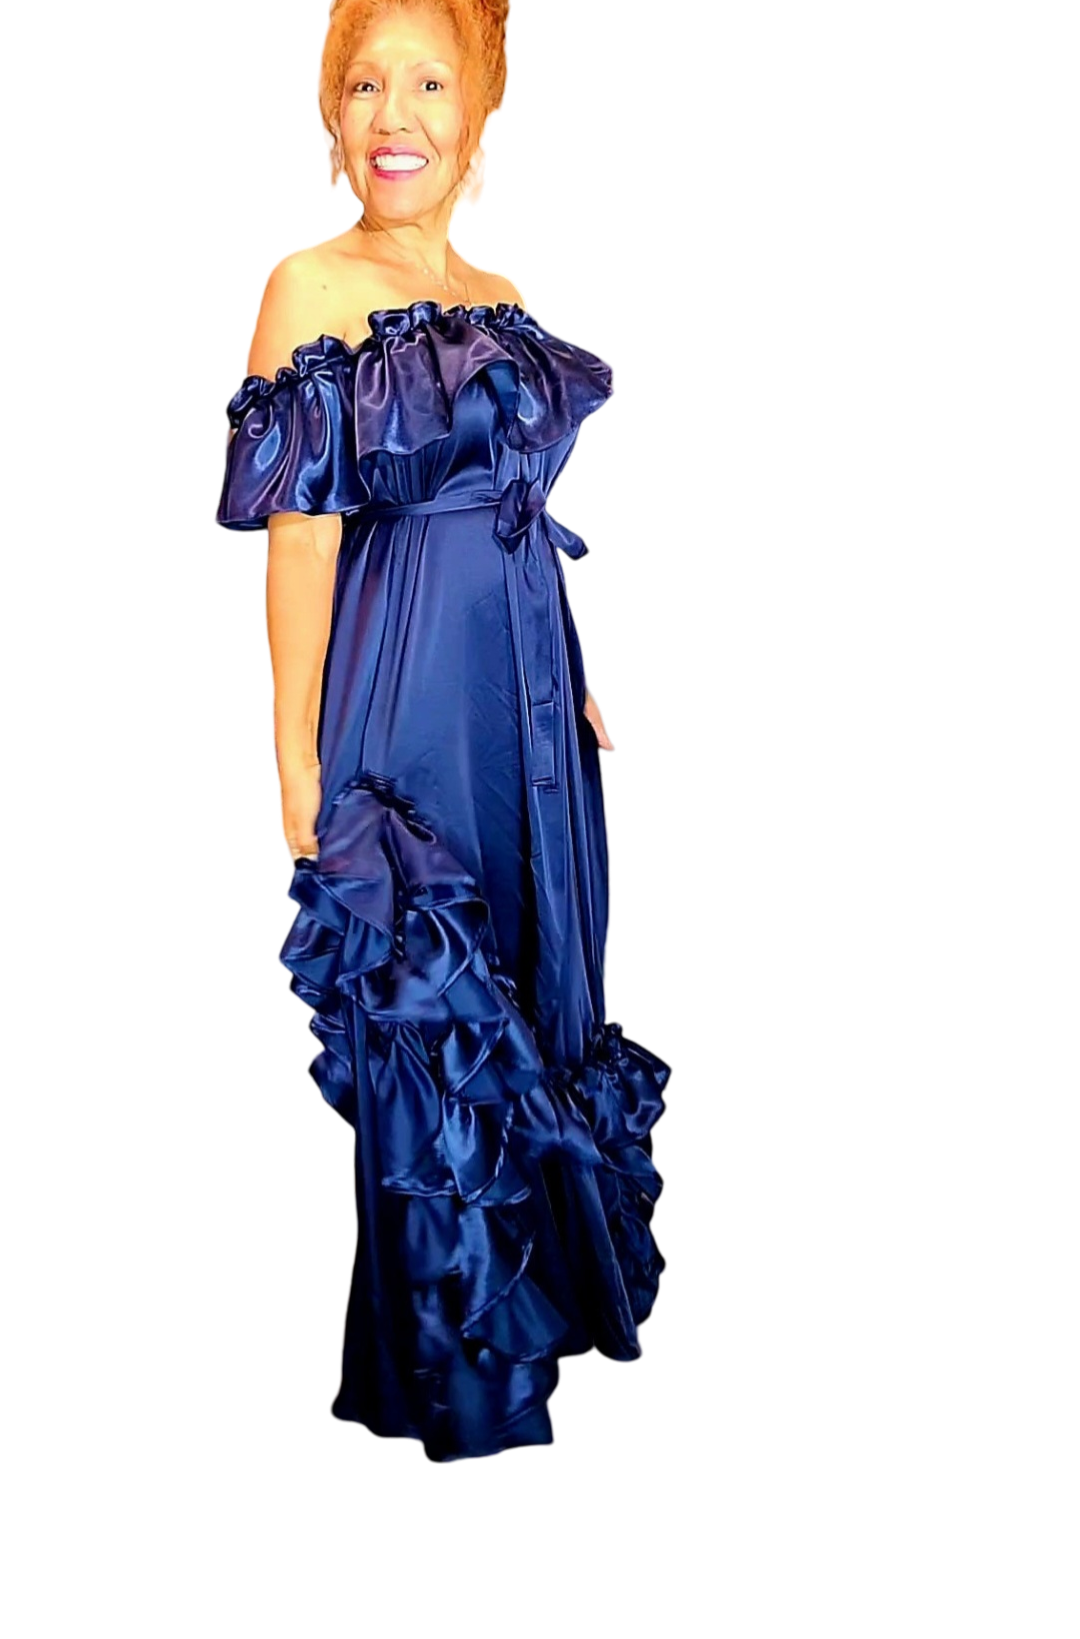 Blue Sky Dress has lots of uniqueness and creativity. Feel free and fly. Touch the sky!!!  There is something magical about this dress that will have you smiling until you take it off.  Ruffles in all the right places, our favorite...